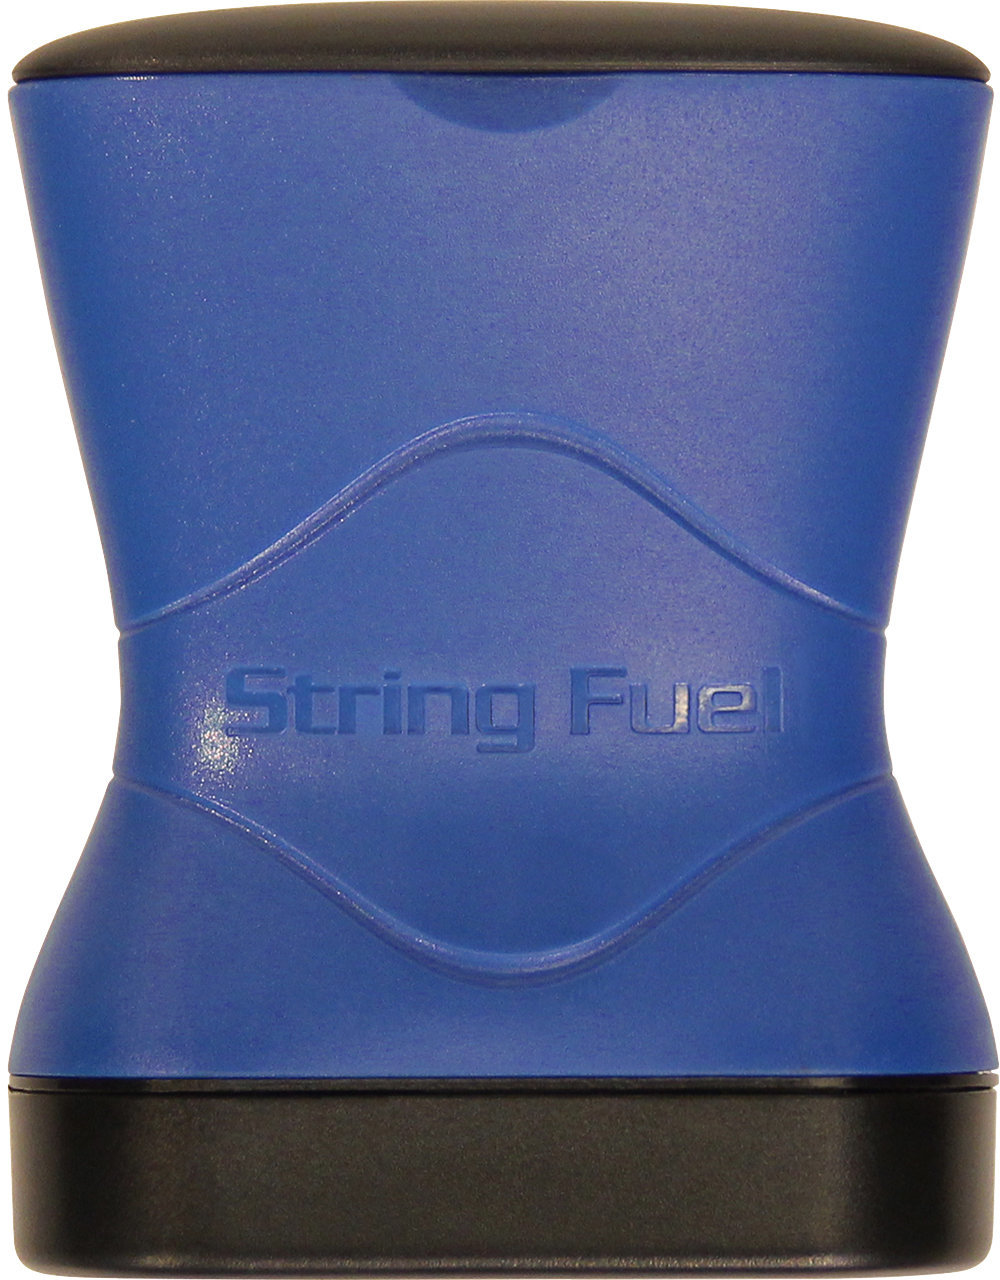 Guitar Care MusicNomad MN109 String Fuel